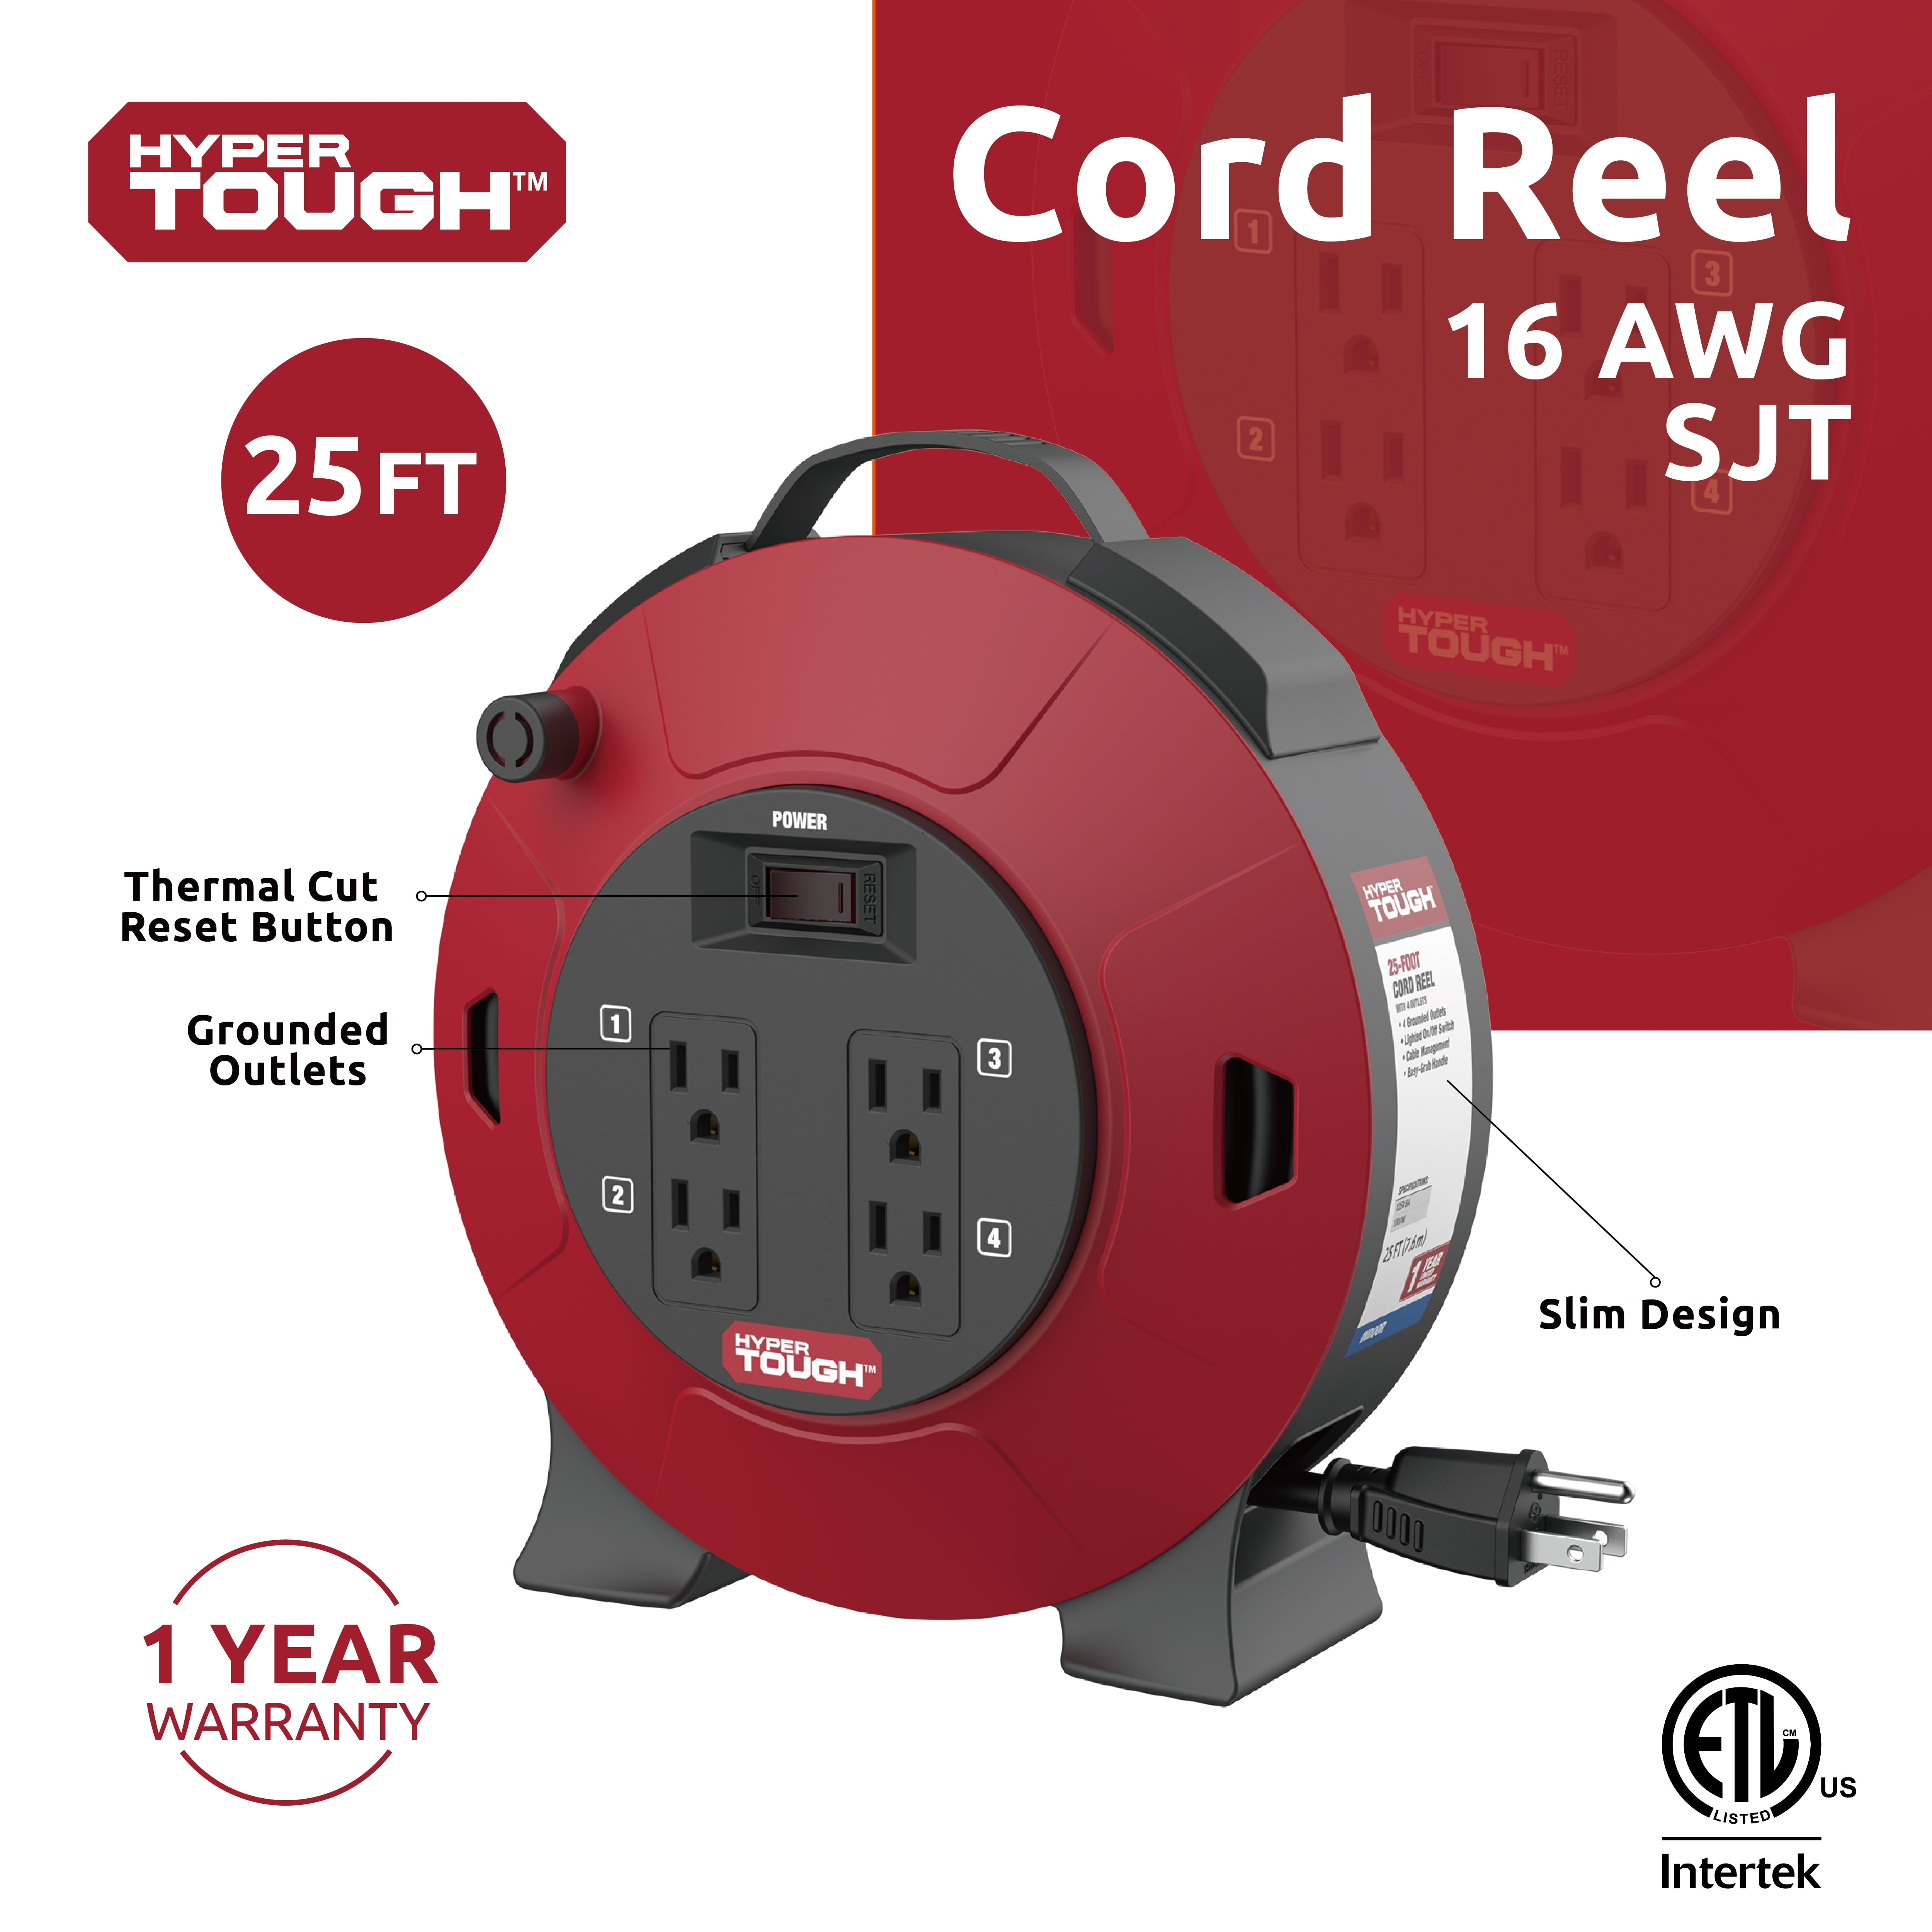 HYPER TOUGH 25 Ft. Retractable Extension Cord Reel With 4